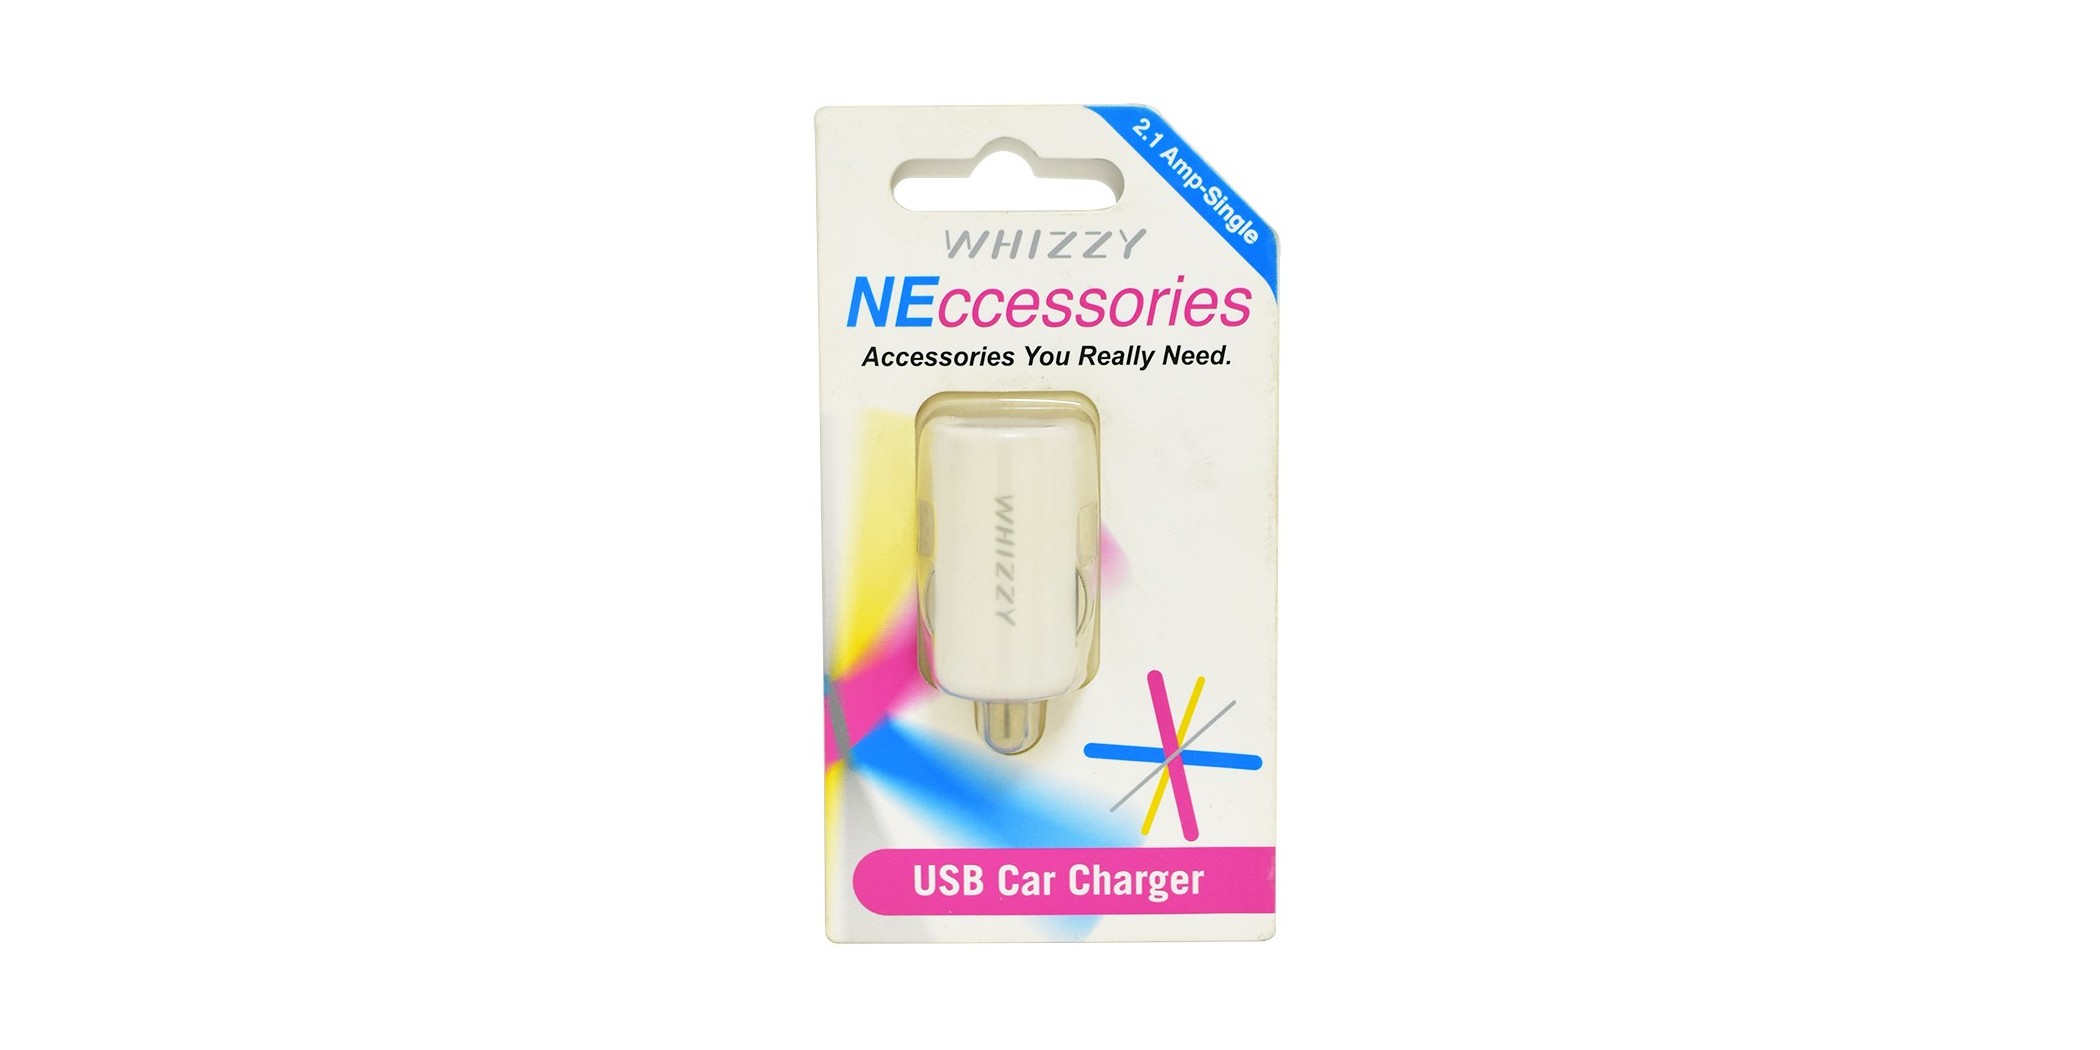 Whizzy USBC1W 2.1Amp USB Car Charger White